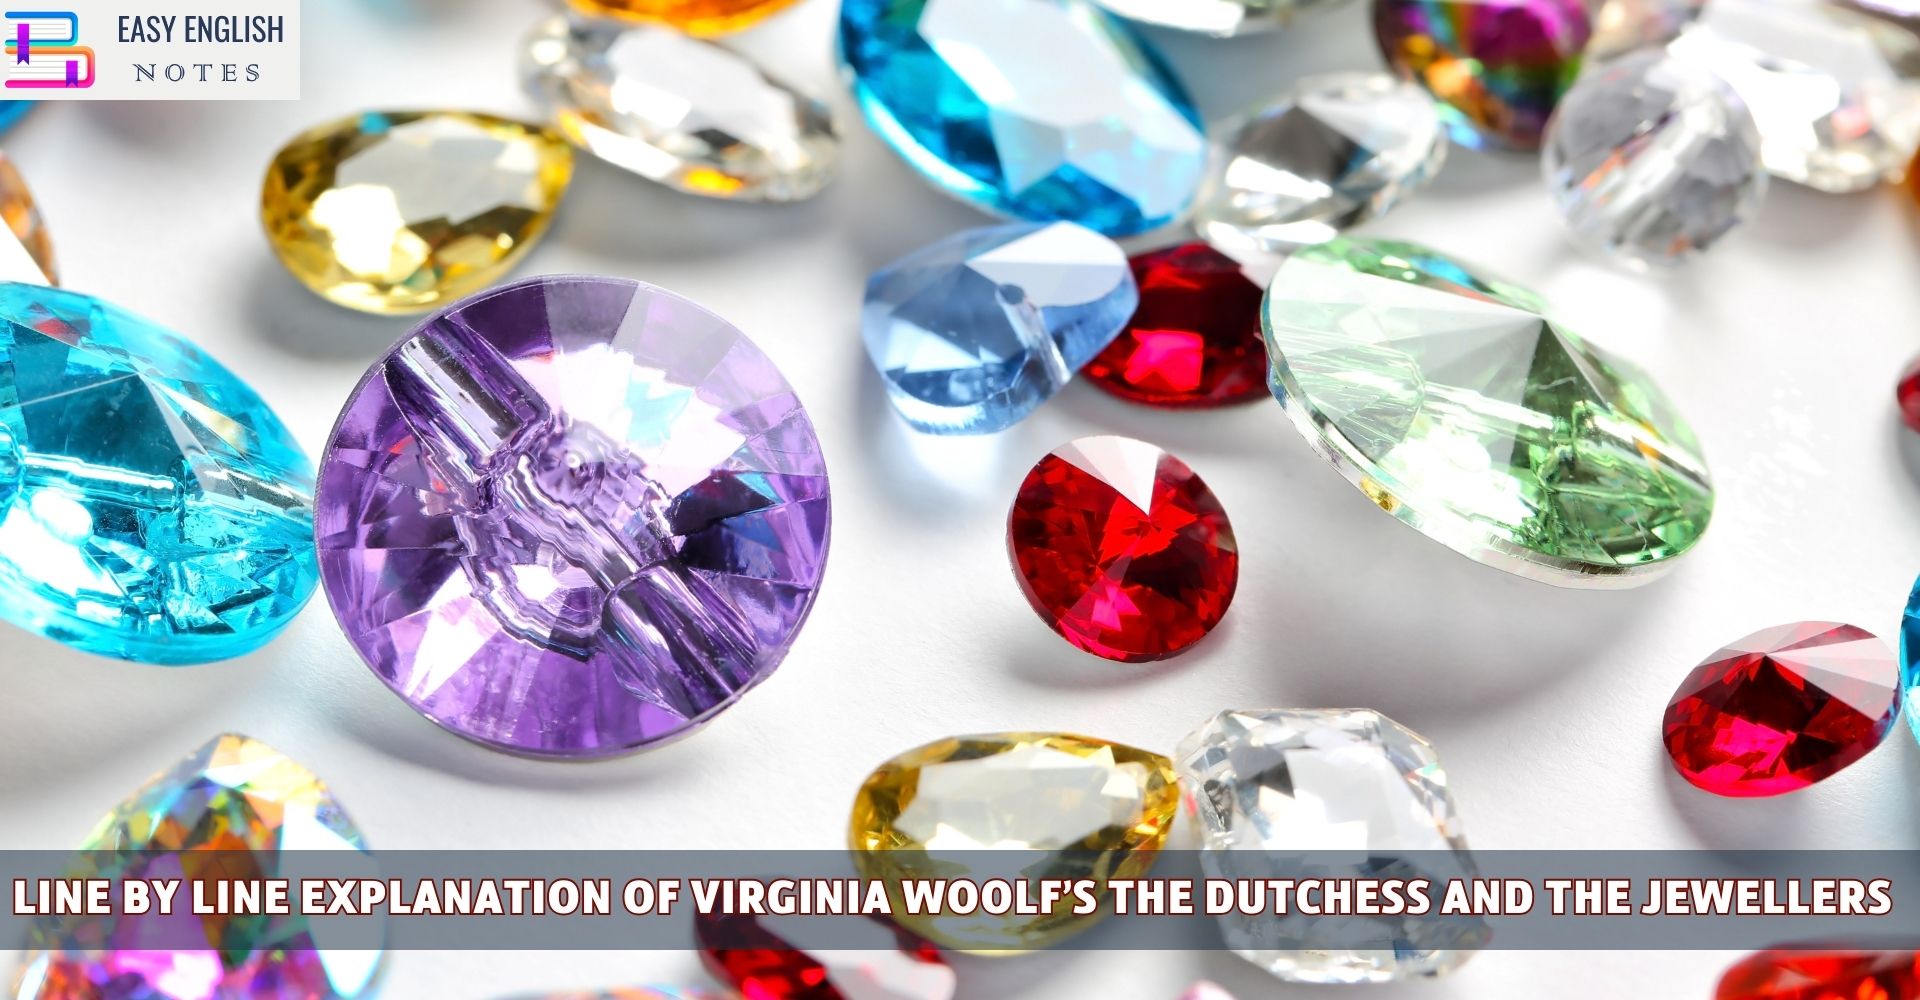 Line By Line Explanation Of Virginia Woolf’s The Dutchess and the Jewellers